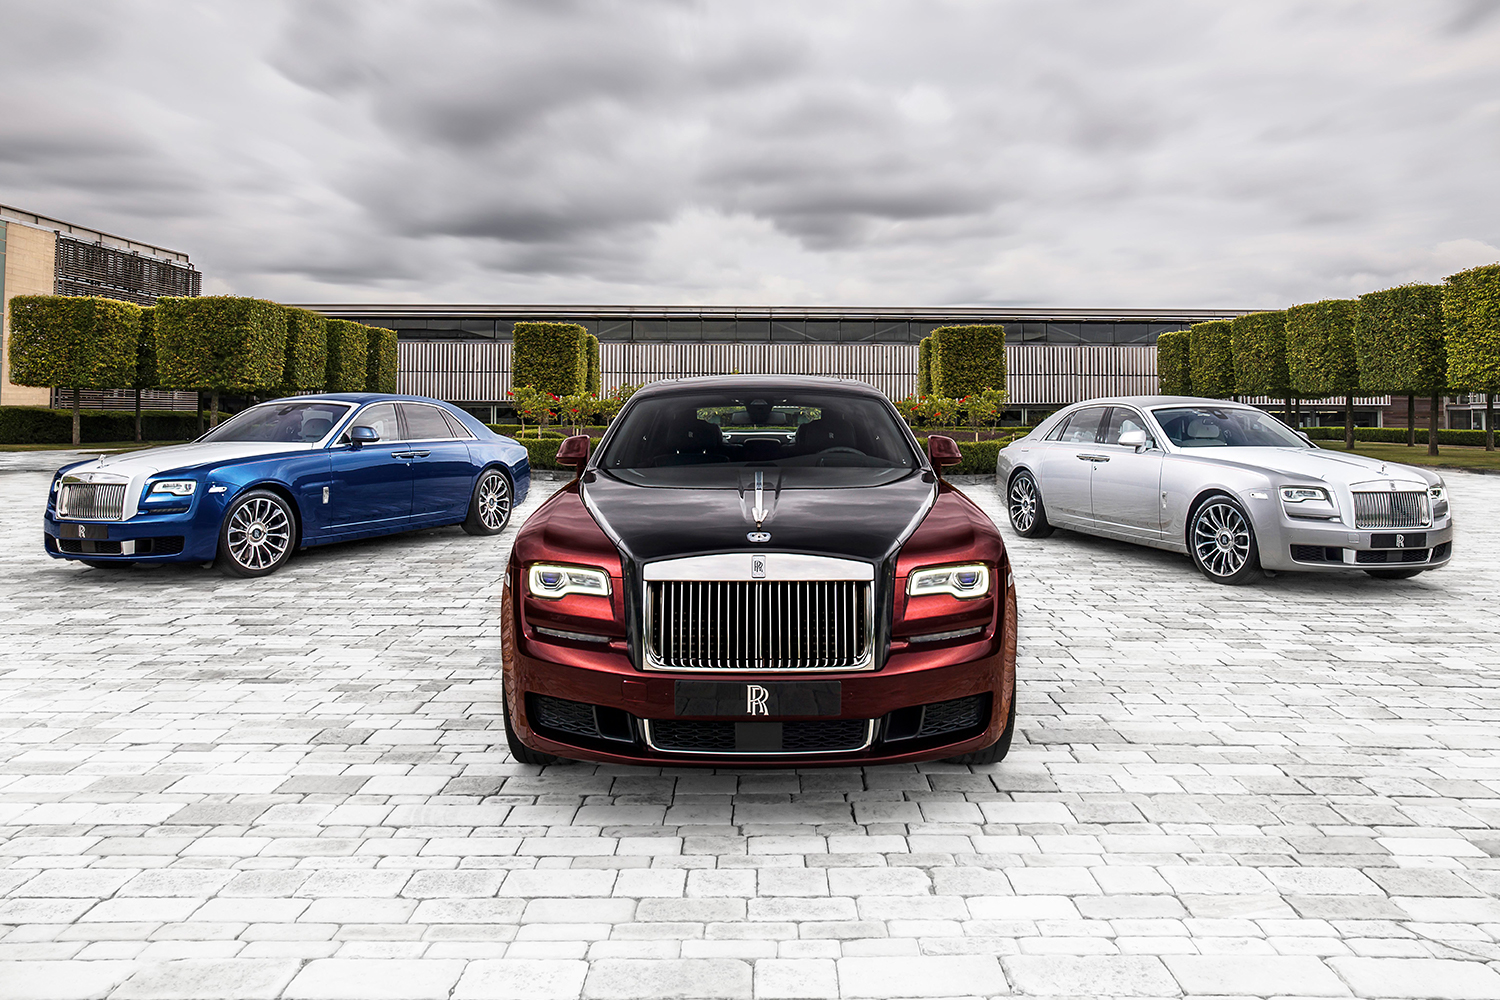 <p><span style="font-weight: 400">Can a car that costs as much as a house be worth the price tag? That’s the question prospective buyers of Rolls-Royce automobiles must ask themselves, and it’s not hyperbolic. The starting price for the British marque’s lineup is just north of $300,000, about the same as the median home price in the U.S.</span></p>
<p><span style="font-weight: 400">Writers Simon Van Booy and Harvey Briggs didn’t set out to answer this question with their new book </span><a href="https://bookshop.org/a/4605/9781788841009"><i><span style="font-weight: 400">Rolls-Royce Motor Cars: Making a Legend</span></i></a><span style="font-weight: 400">. Instead, they wanted to invite the world into the halls of the first-name in vehicular opulence — and they succeeded, providing an exclusive look at the company’s home in Goodwood, never-before-seen archival materials, interviews with the artisans and engineers, and profiles of some of the most decadent vehicles to ever bear the Spirit of Ecstasy.</span></p>
<p><span style="font-weight: 400">However, we posed that question to Van Booy and Briggs after they embedded themselves with the Rolls-Royce team, and they explained — from the paint to the engine to the “magic carpet ride” — why these cars are, in fact, worth the price of entry.</span></p>